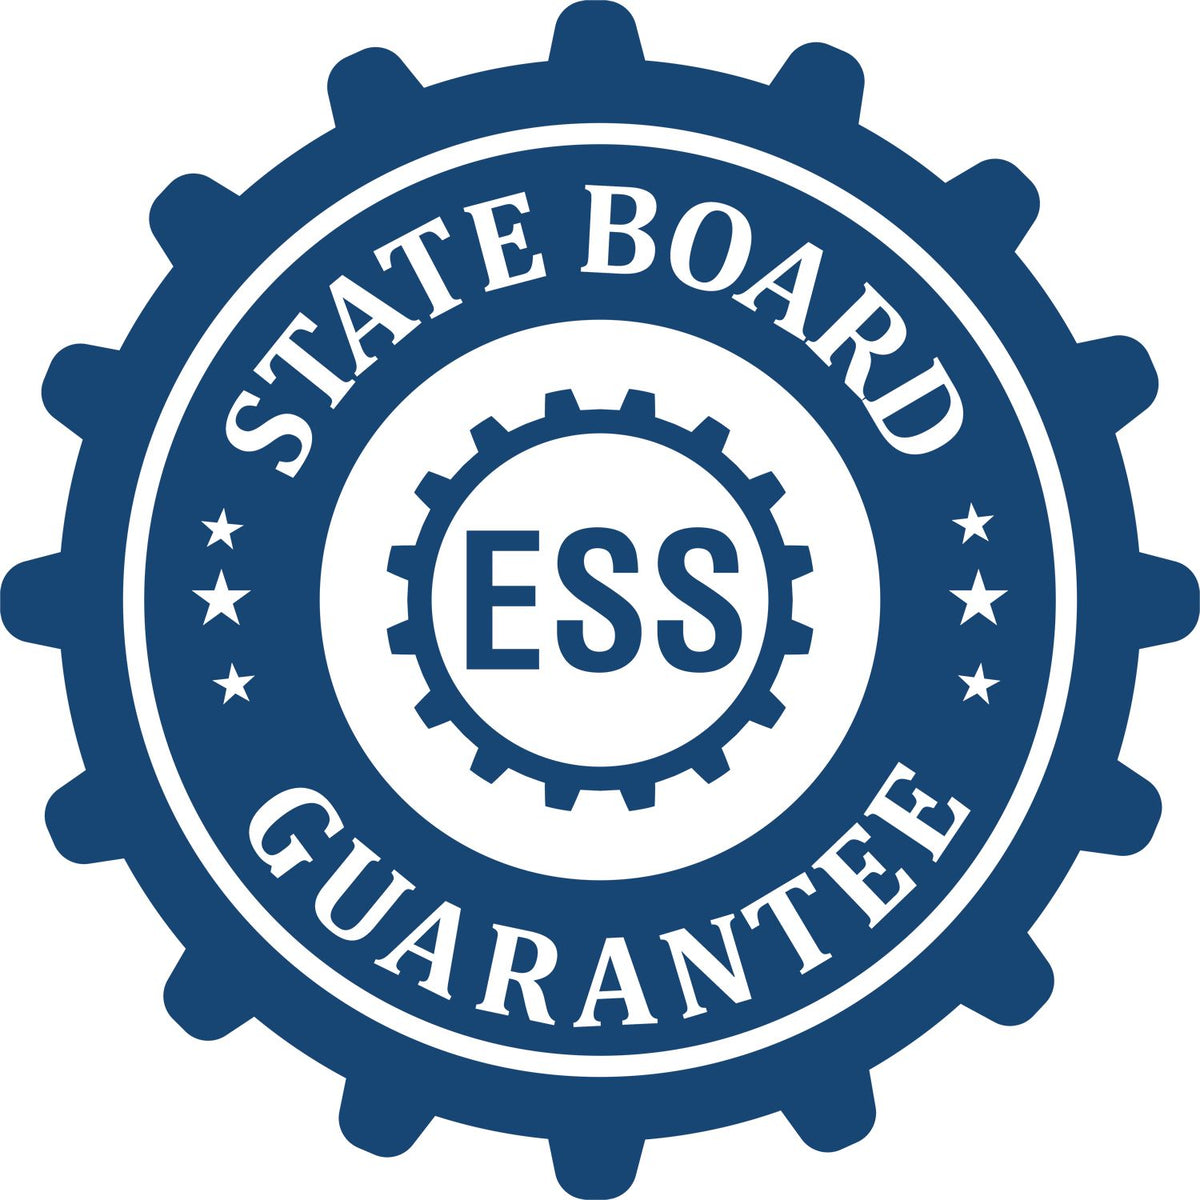 An emblem in a gear shape illustrating a state board guarantee for the Soft Pocket Florida Landscape Architect Embosser product.